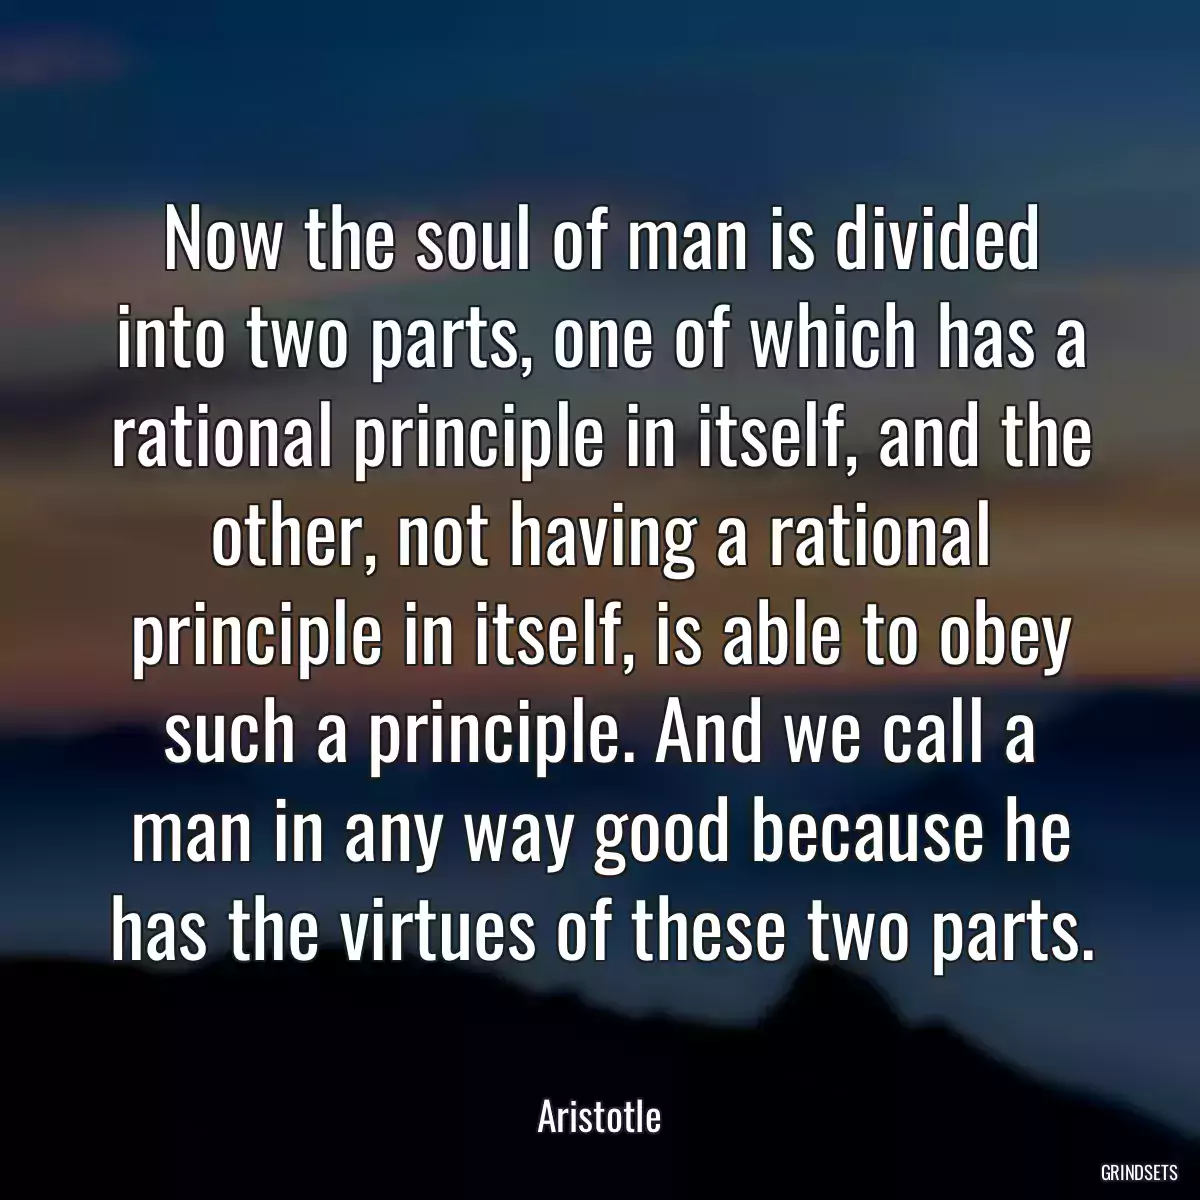 Now the soul of man is divided into two parts, one of which has a rational principle in itself, and the other, not having a rational principle in itself, is able to obey such a principle. And we call a man in any way good because he has the virtues of these two parts.